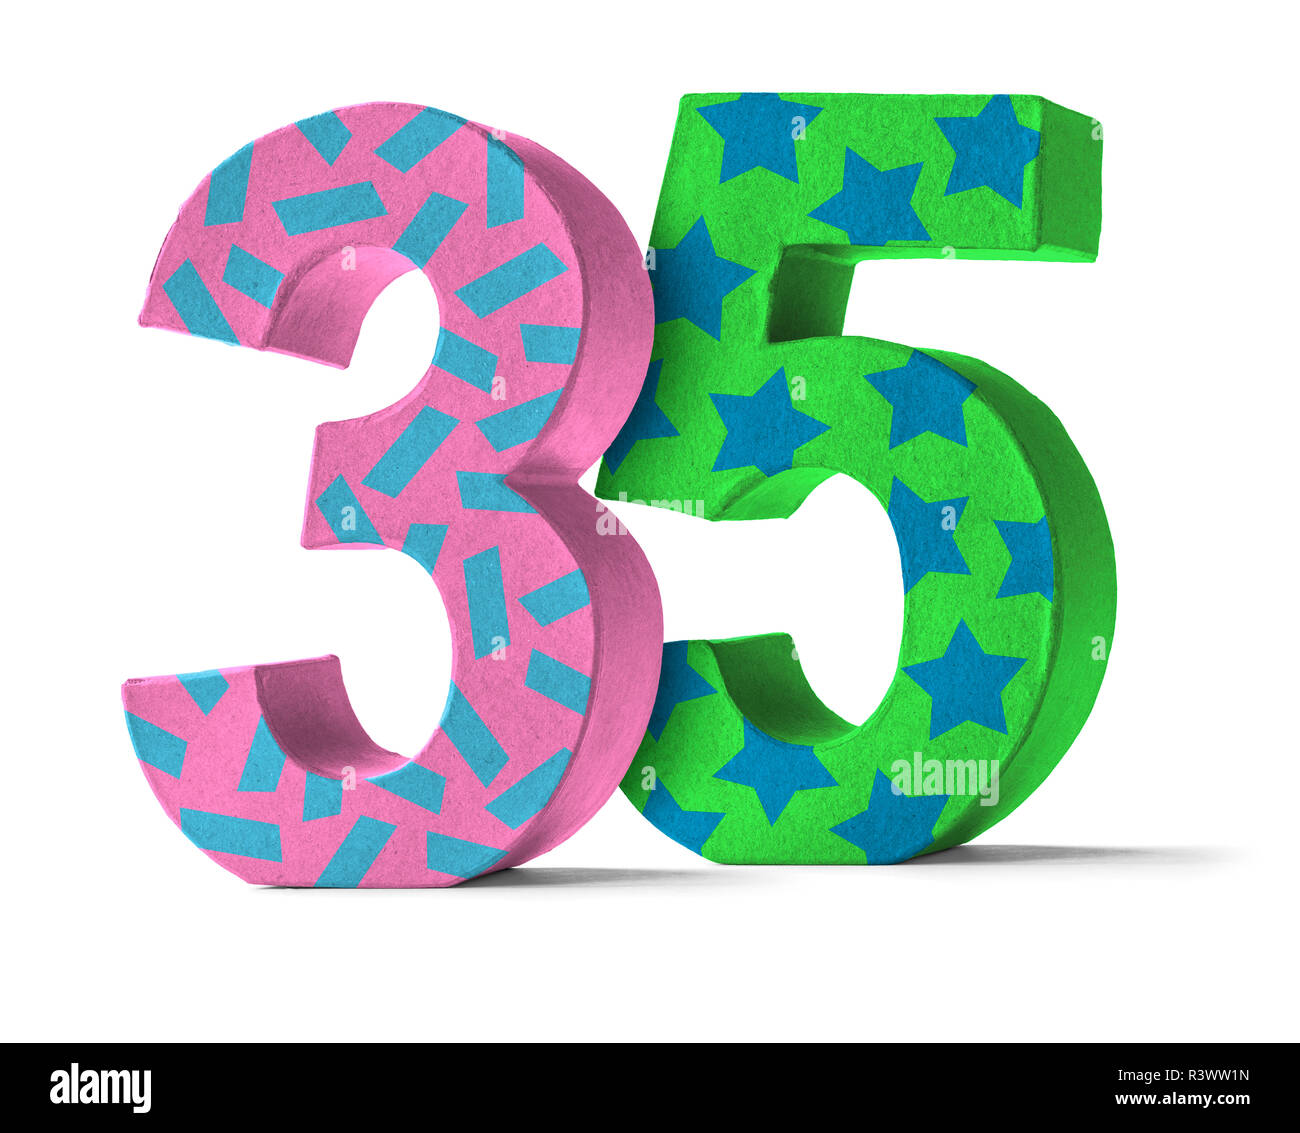 colorful-number-of-cardboard-number-35-stock-photo-alamy